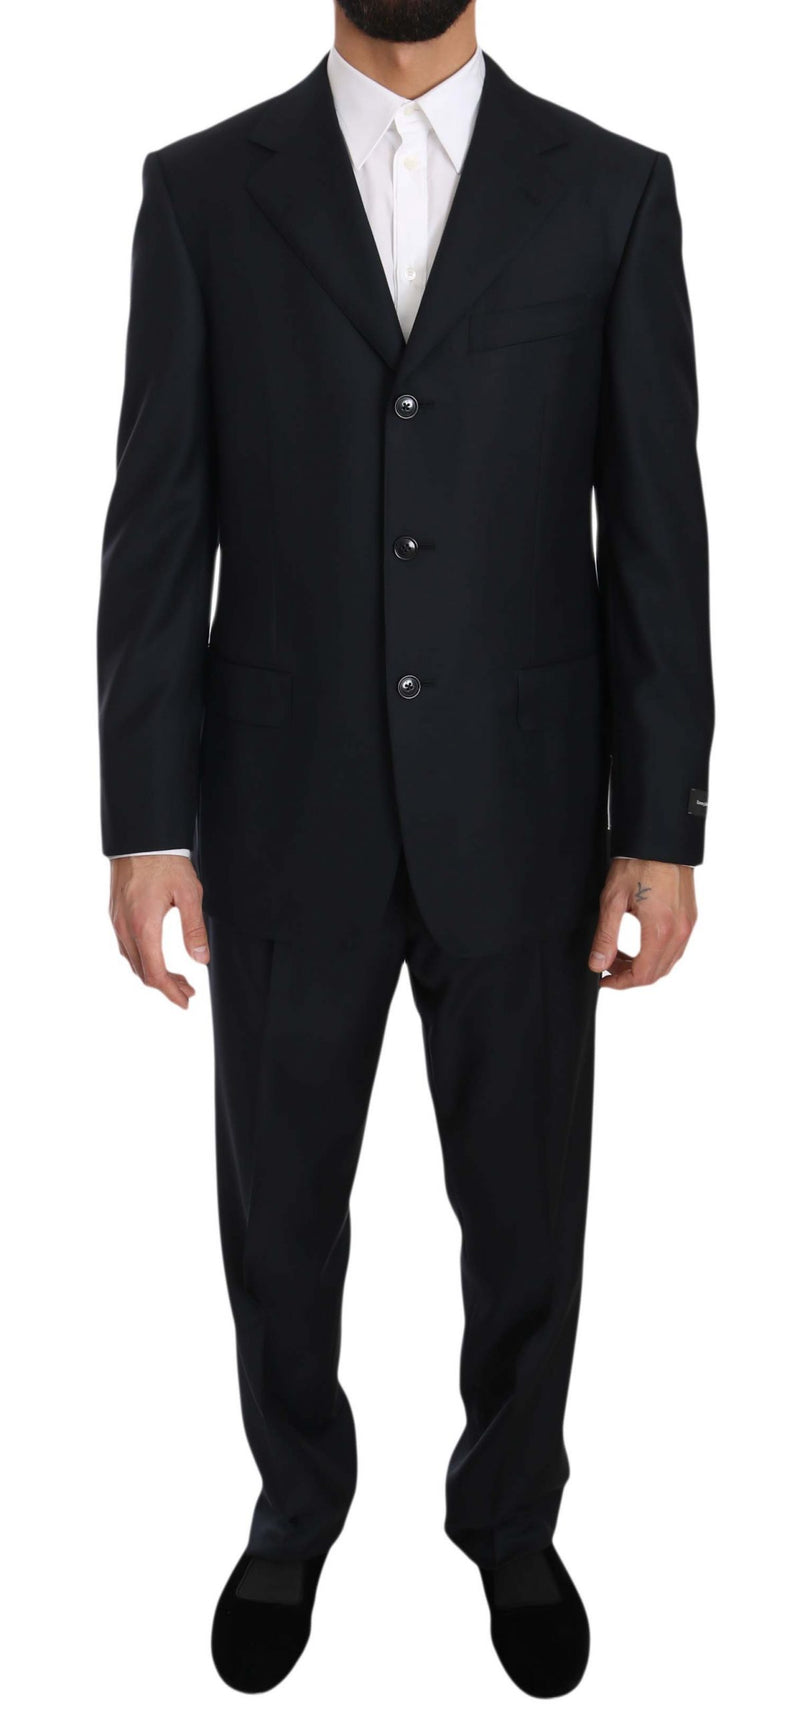 Black two Piece 3 Button Wool suit